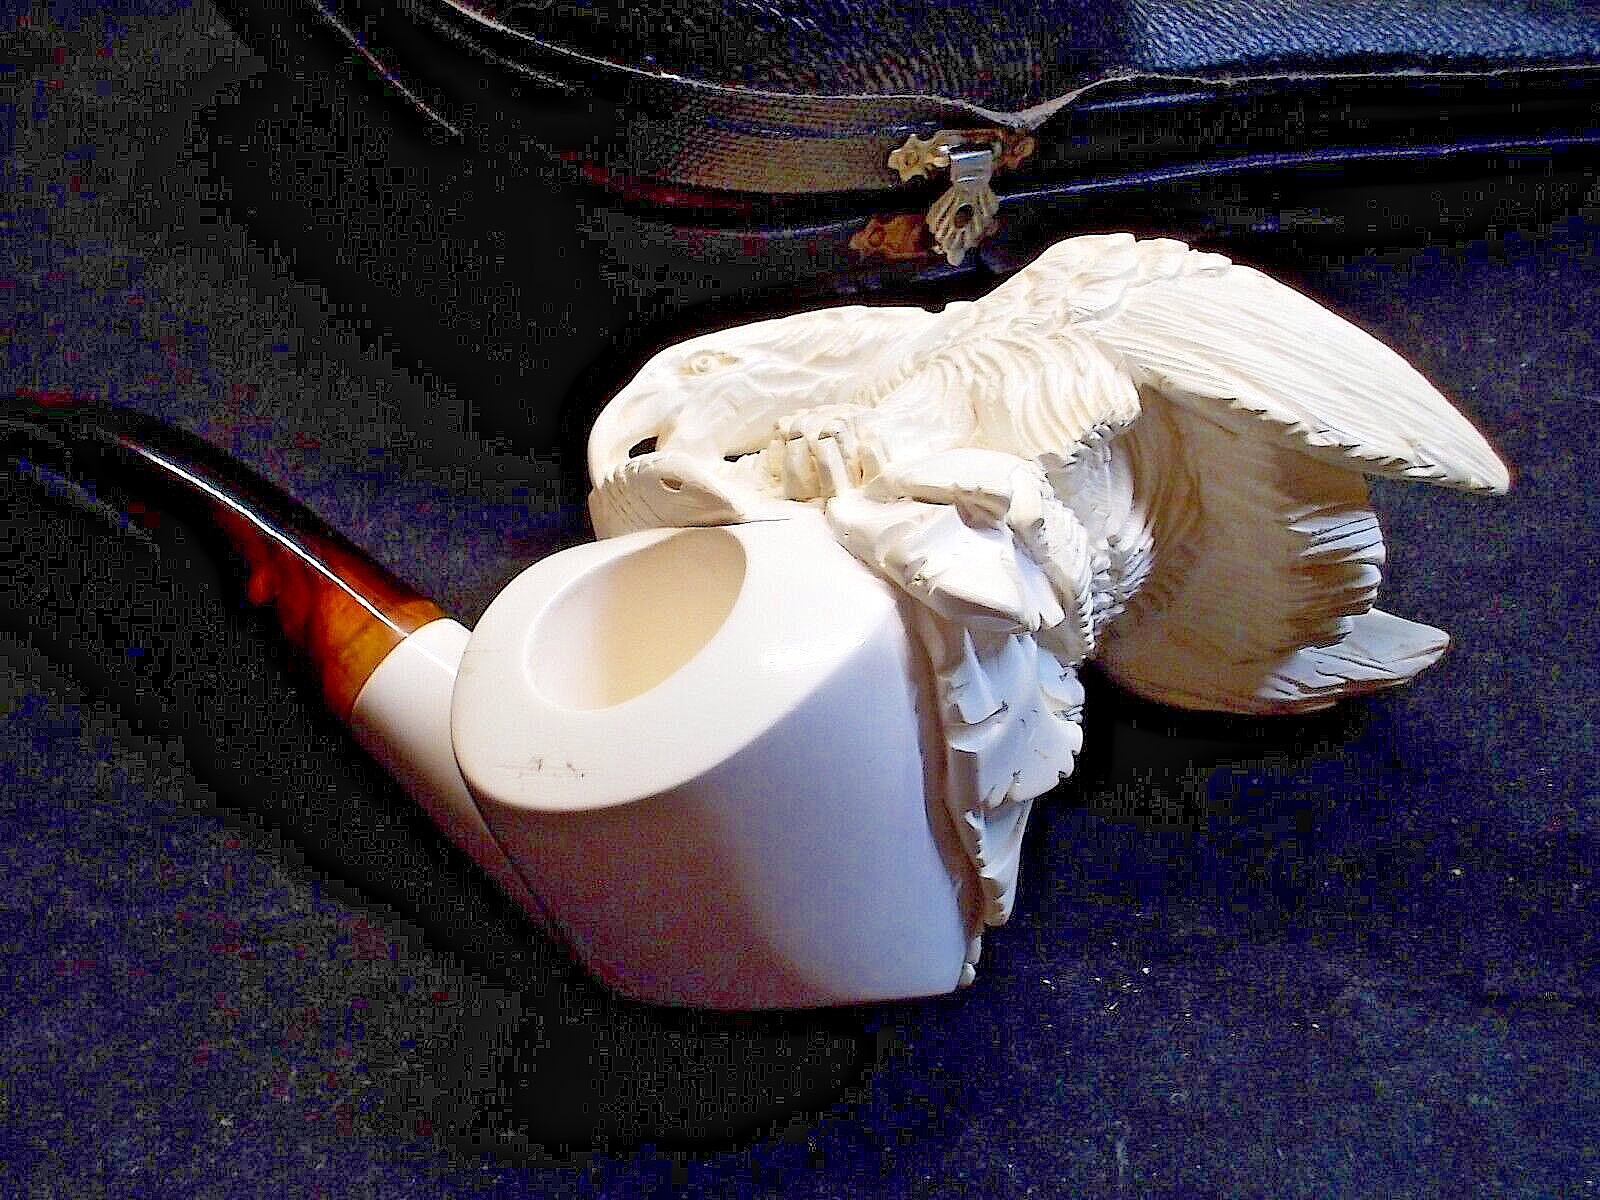 🔴UNSMOKED MEERSCHAUM PIPE FEATURING AN EAGLE EATING A SNAKE IN FITTED CASE